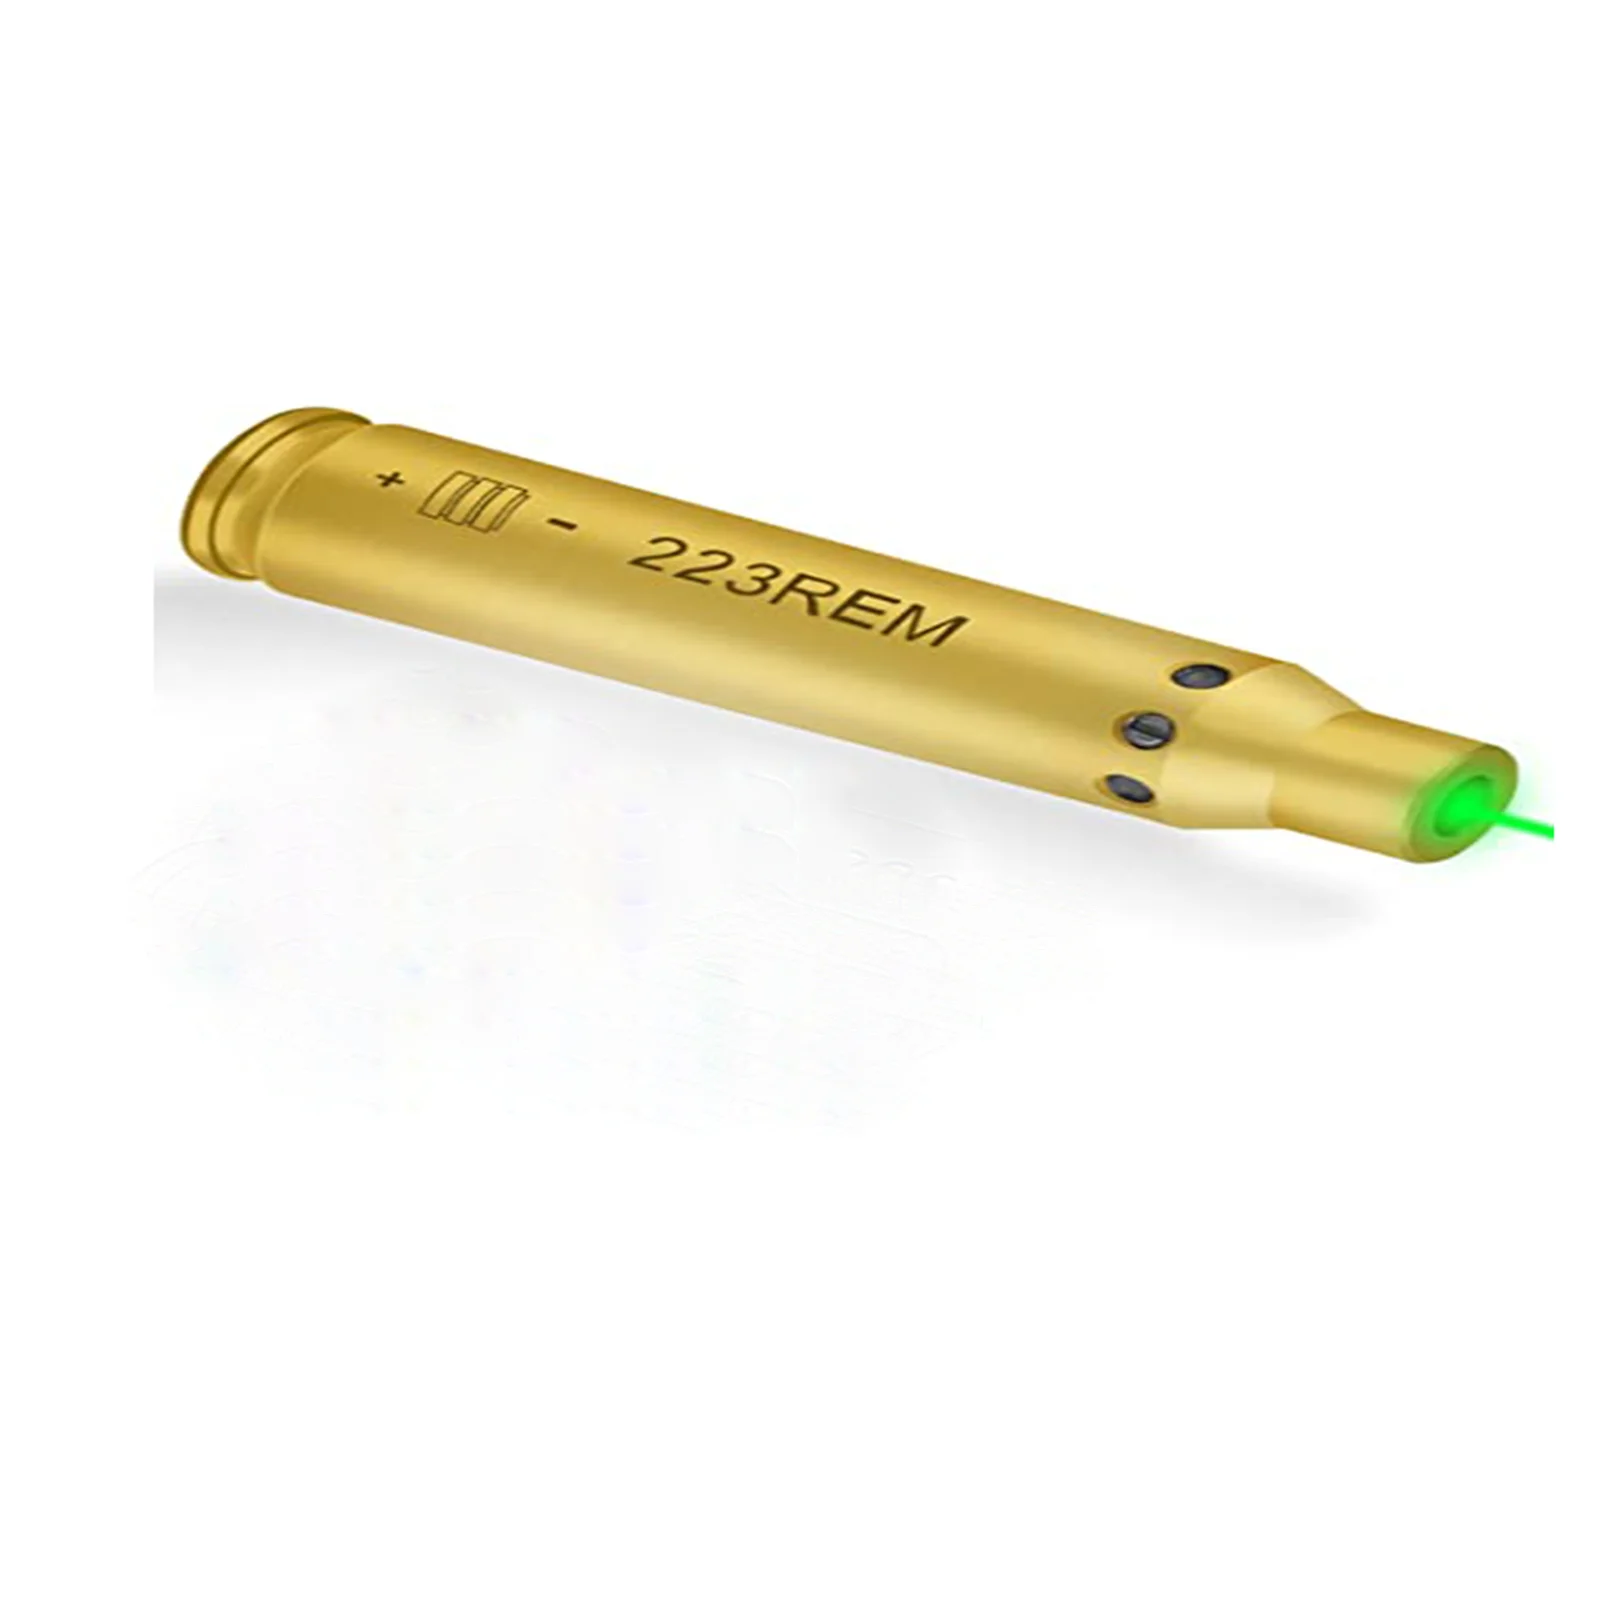 Bore Sight Cal Green Dot Boresighter 223 5.56mm Rem laser bore sight with Two Sets of Batteries